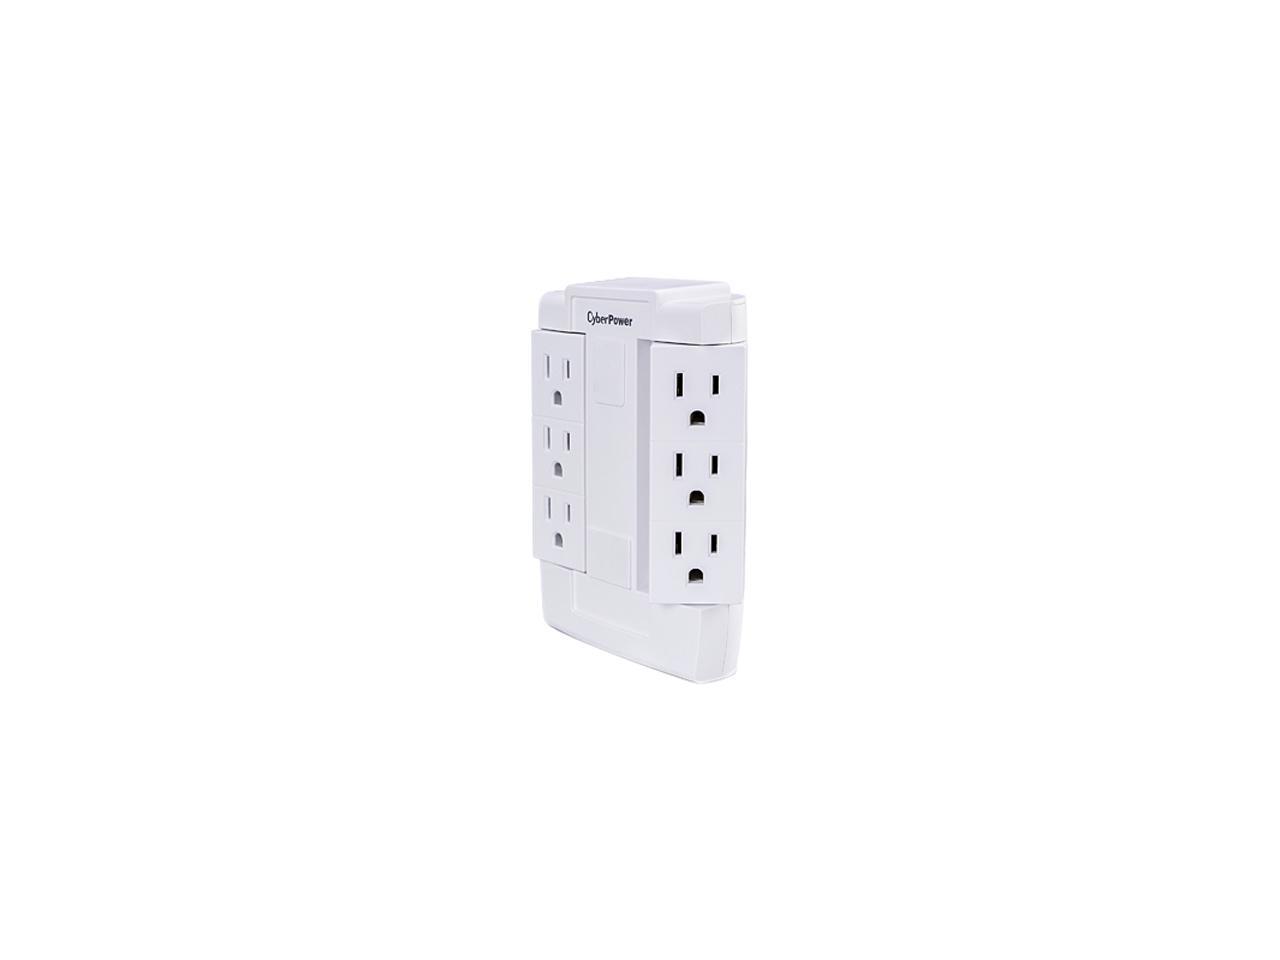 CyberPower GT600P 6 Outlets Adapter 125V Input Voltage 1875W Maximum Power